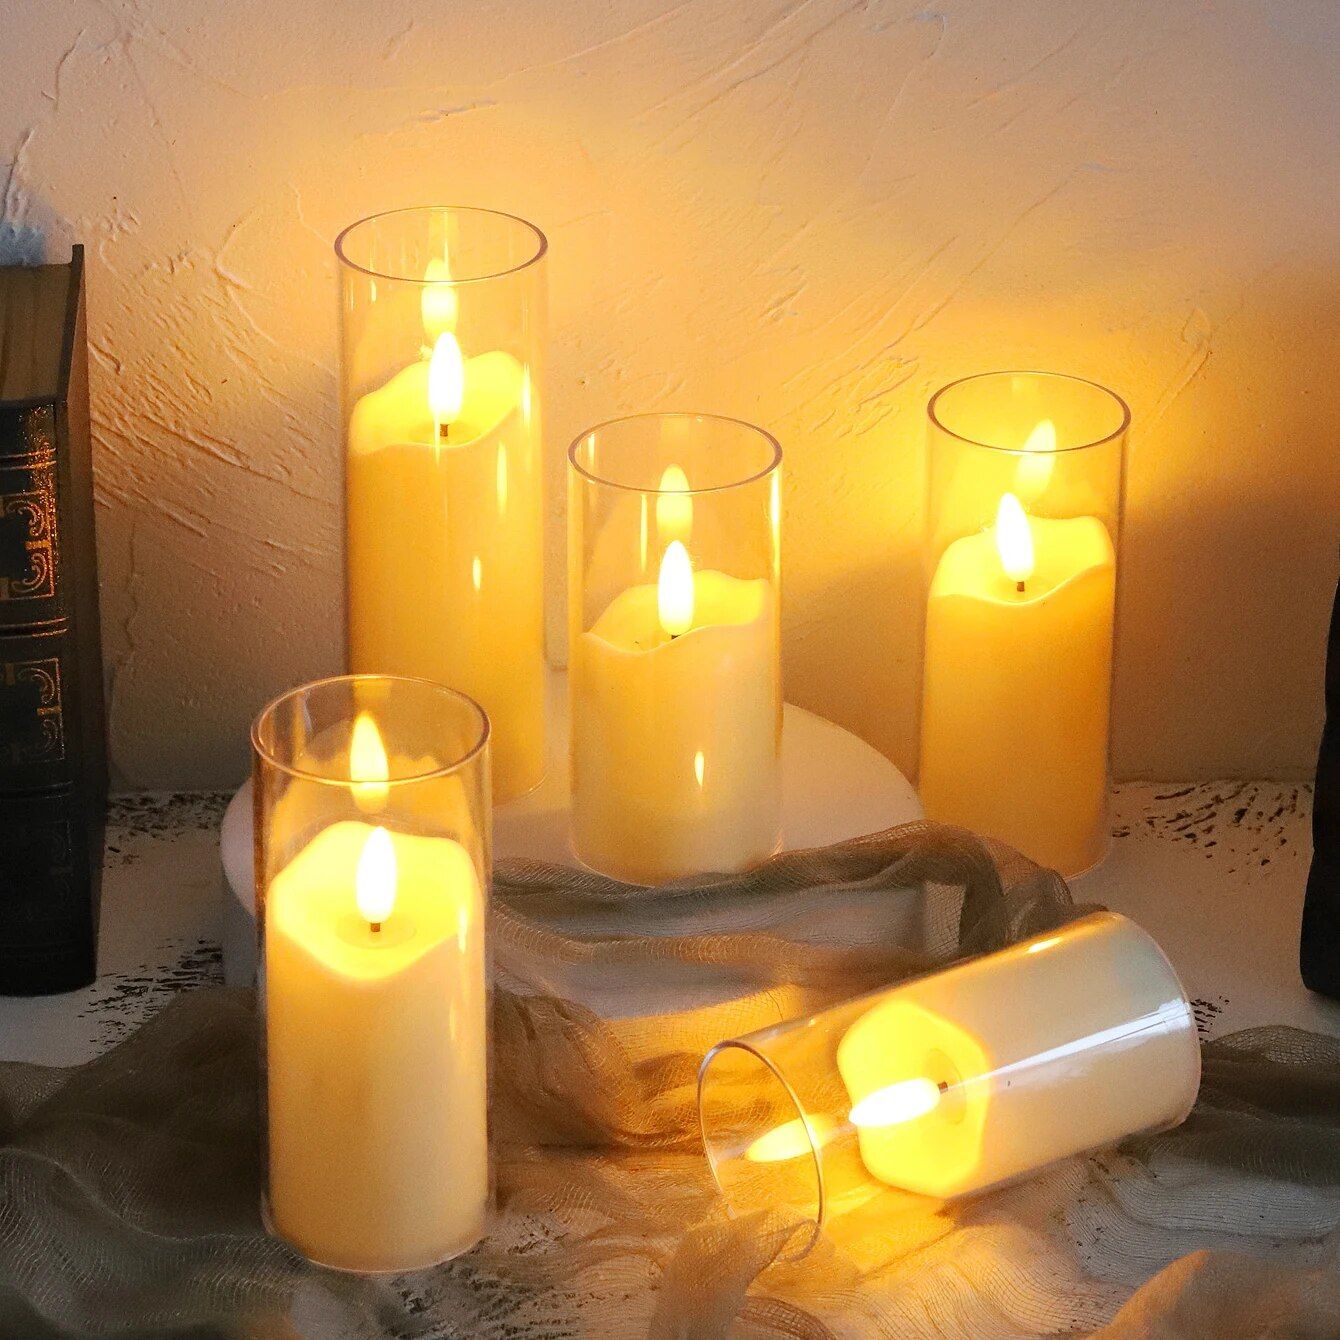 Flameless Electric Candles